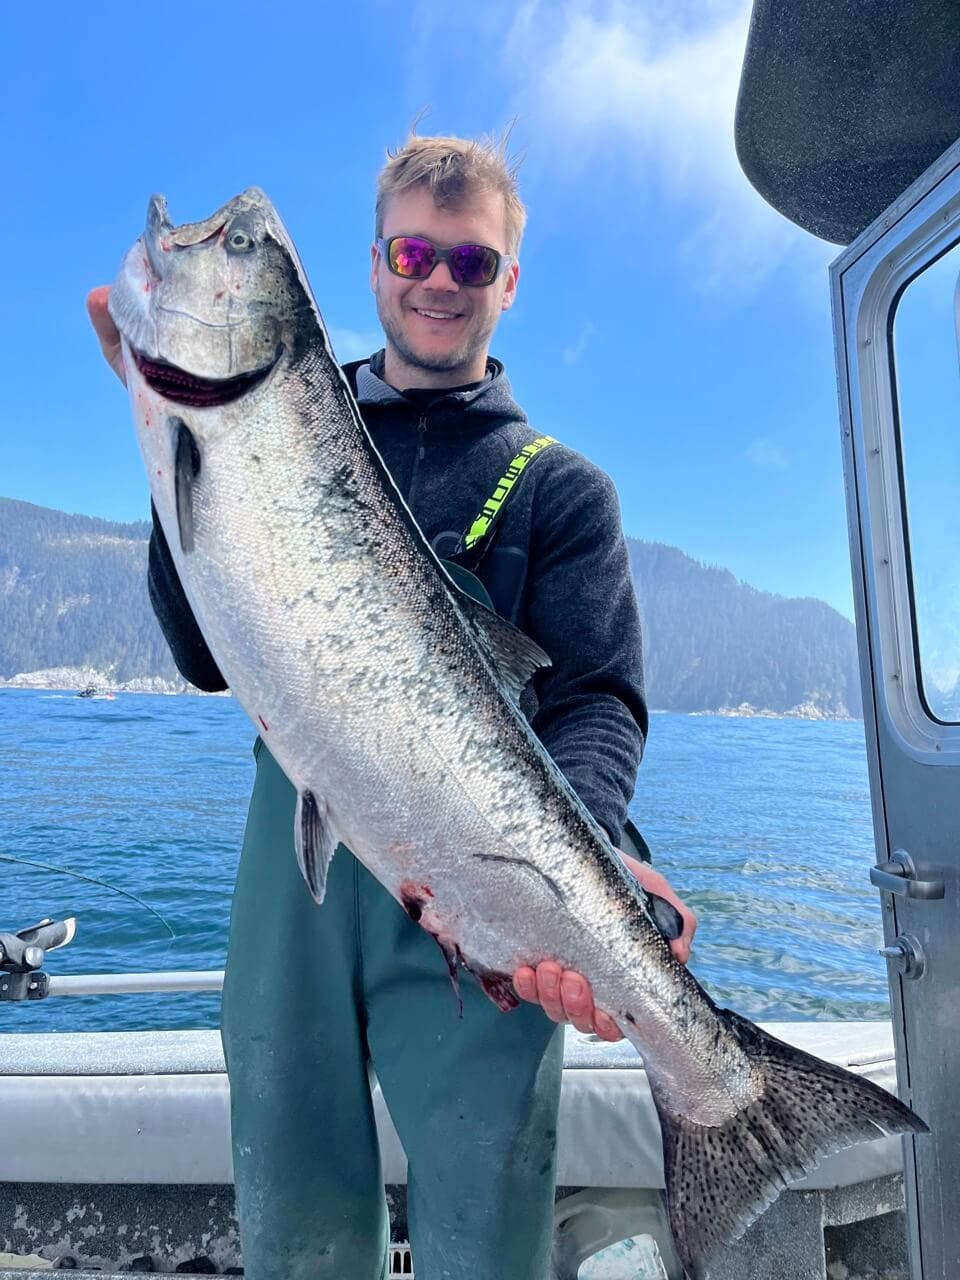 A man on a boat in Sitka, Alaska poses holding a large salmon